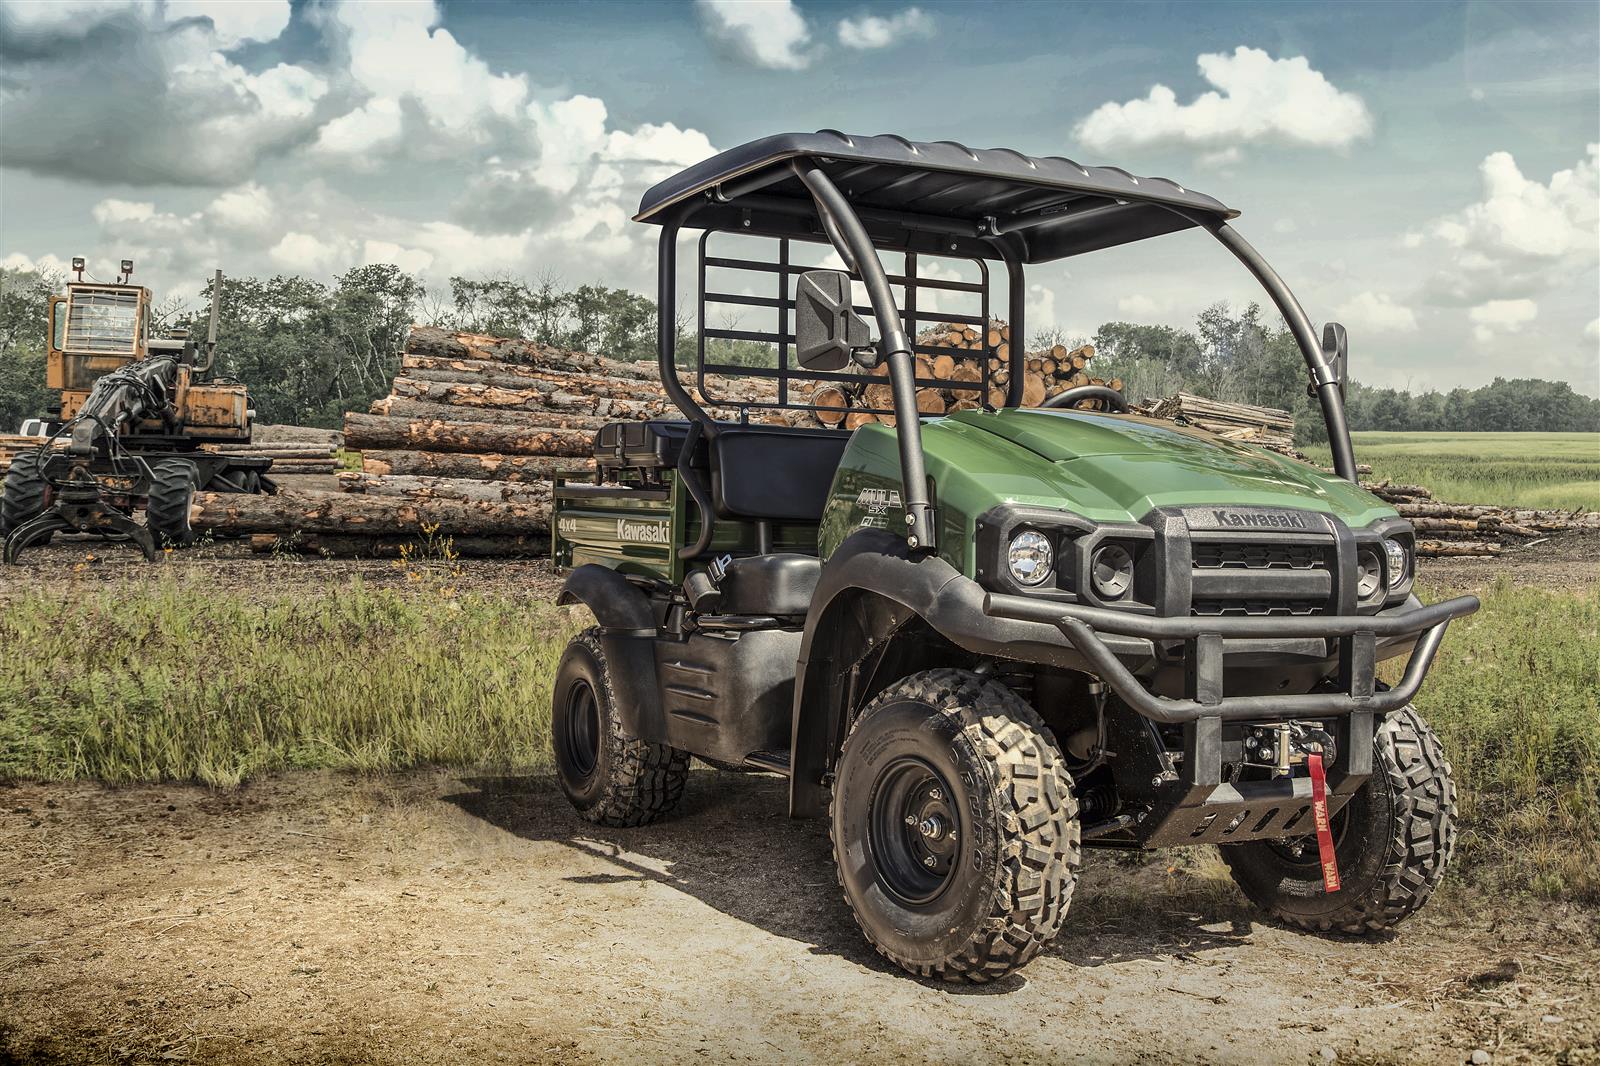 2022 MULE SX 4x4 and PROMX announced